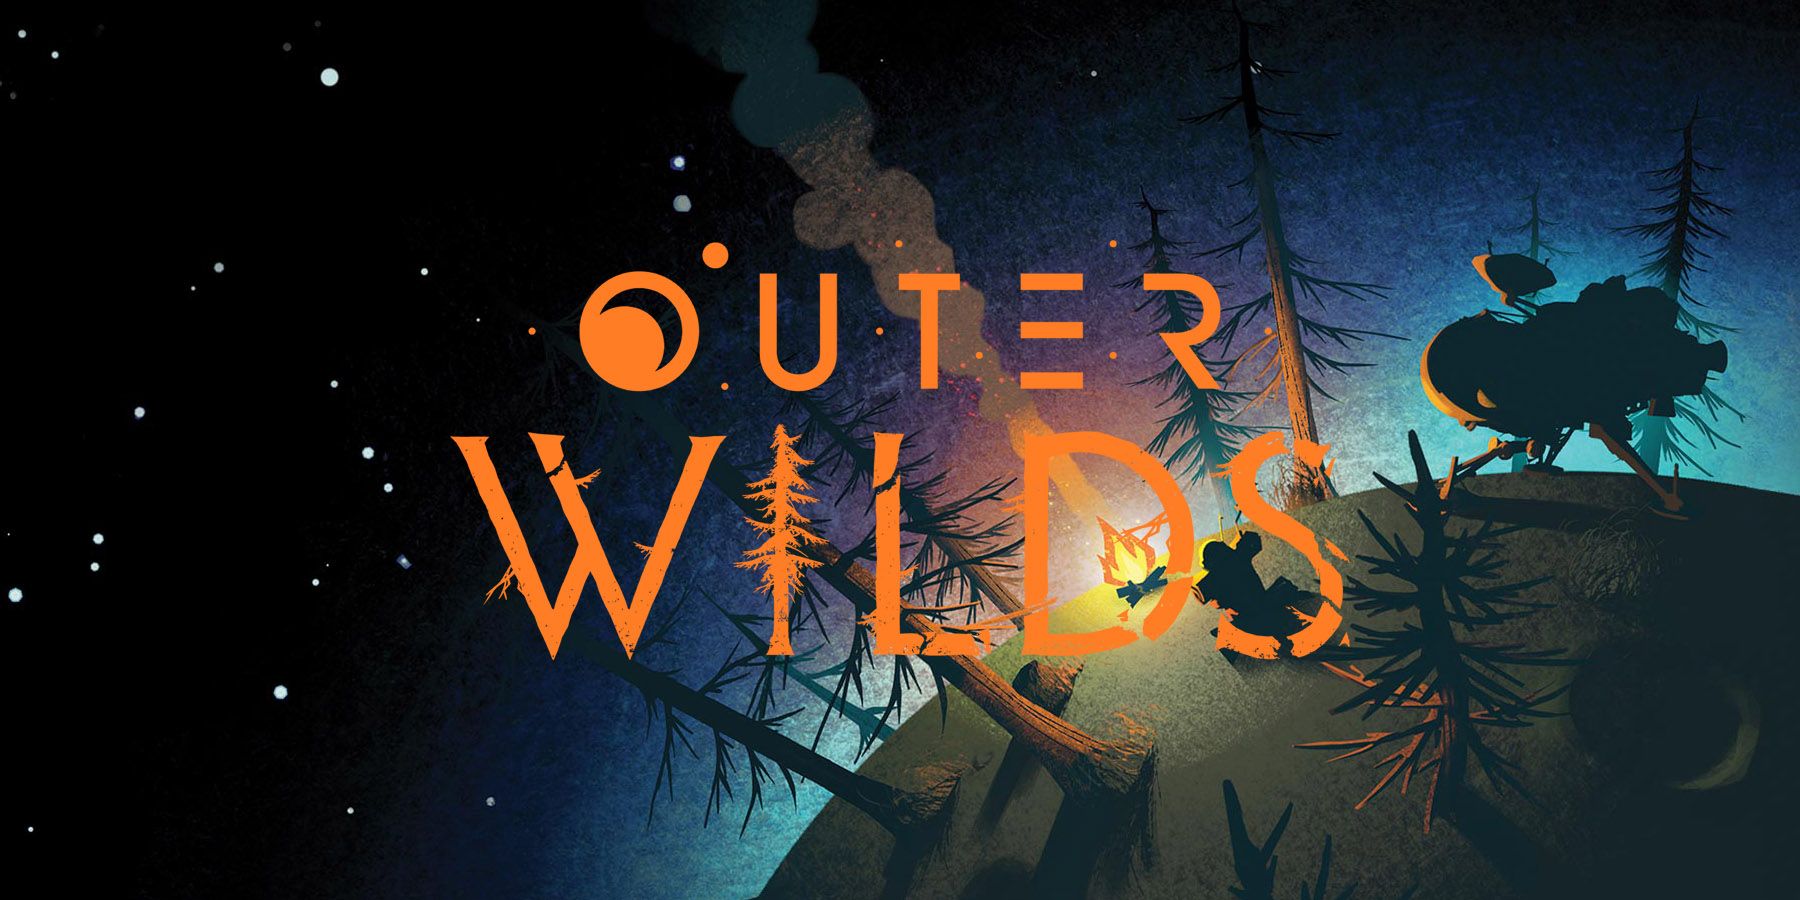 Somiaz on X Wallpaper Engine animated background Only 1080p currently  anything higher and the PC dies The name is Outer Wilds Planets This is  the Low Quality version It features things like